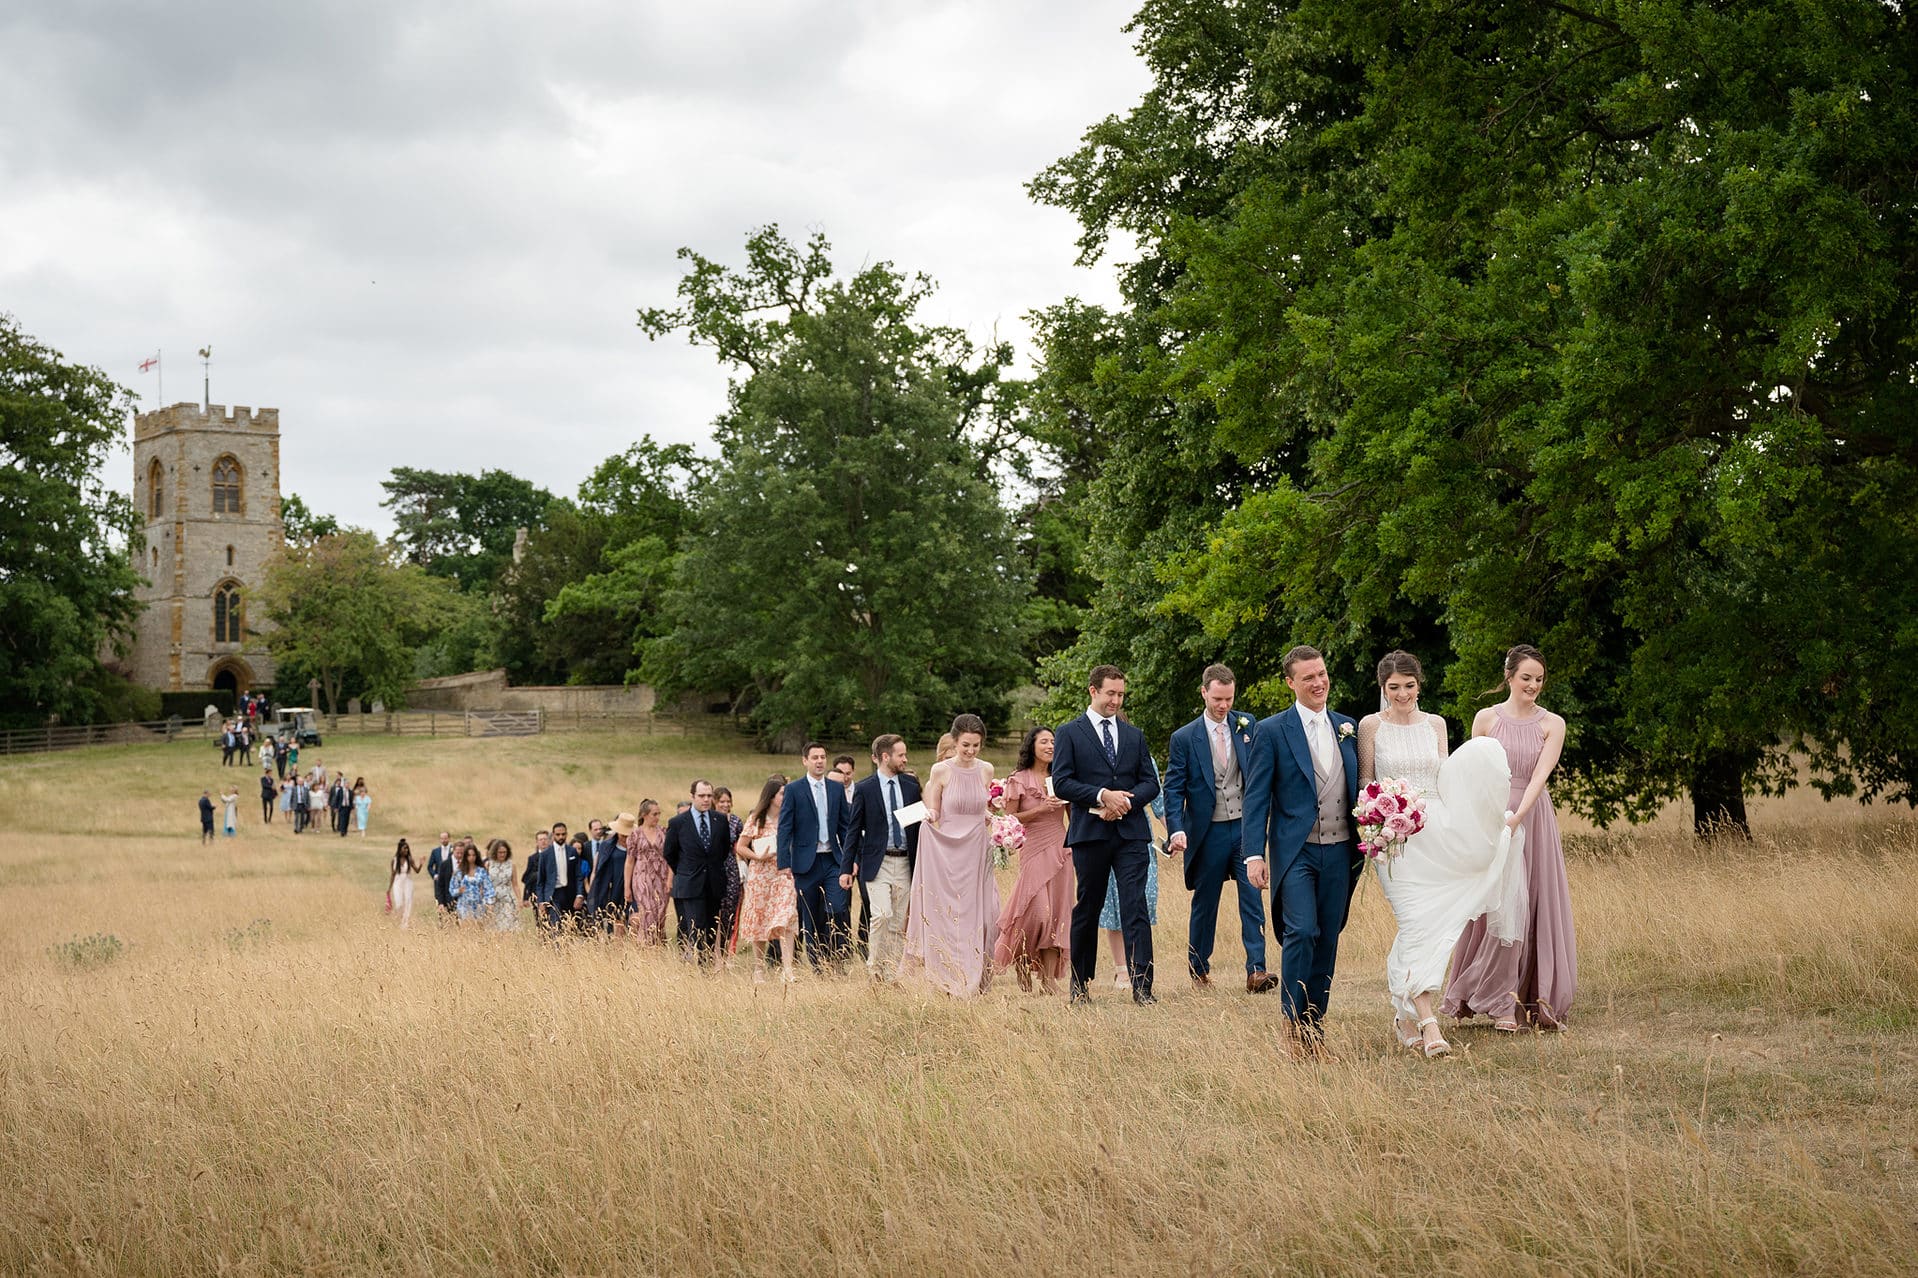 Bride and groom leading their wedding guests through a field of long grass with the church behind them